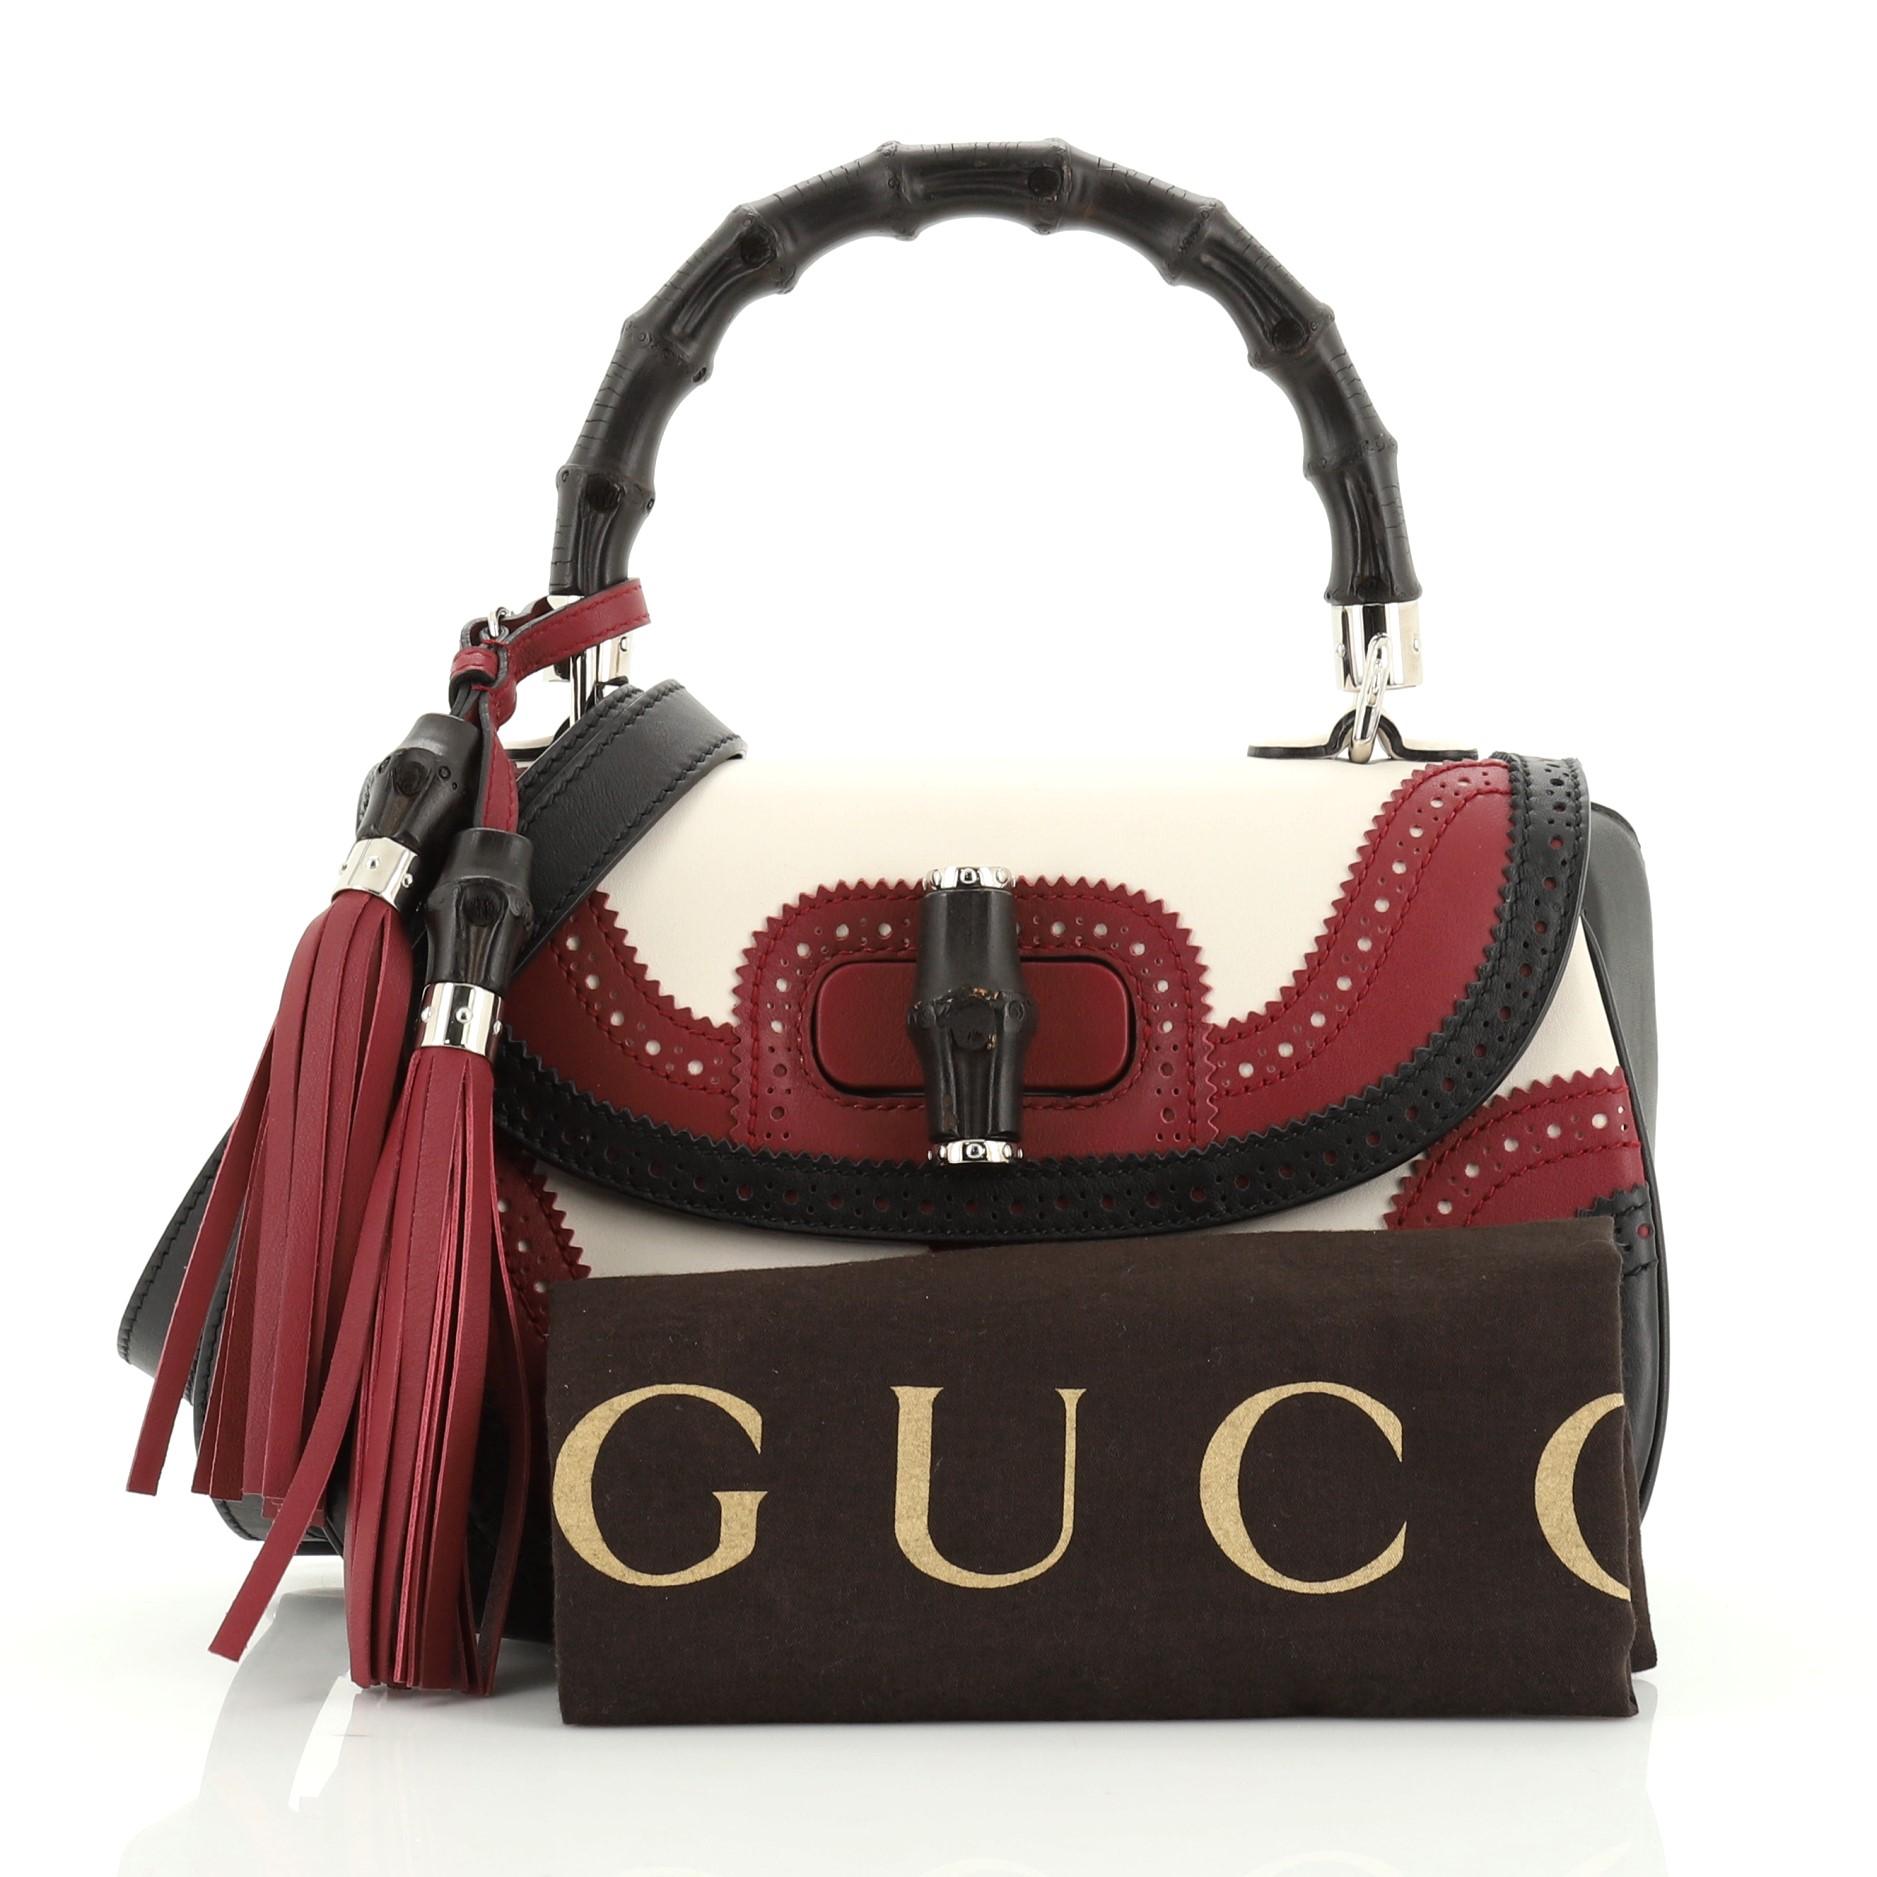 This Gucci New Bamboo Convertible Top Handle Bag Leather Medium was first designed in 1947, created out of burnishing cane sticks. Crafted in white, red and multicolor leather, it features a bamboo top handle, leather trim and silver-tone hardware.